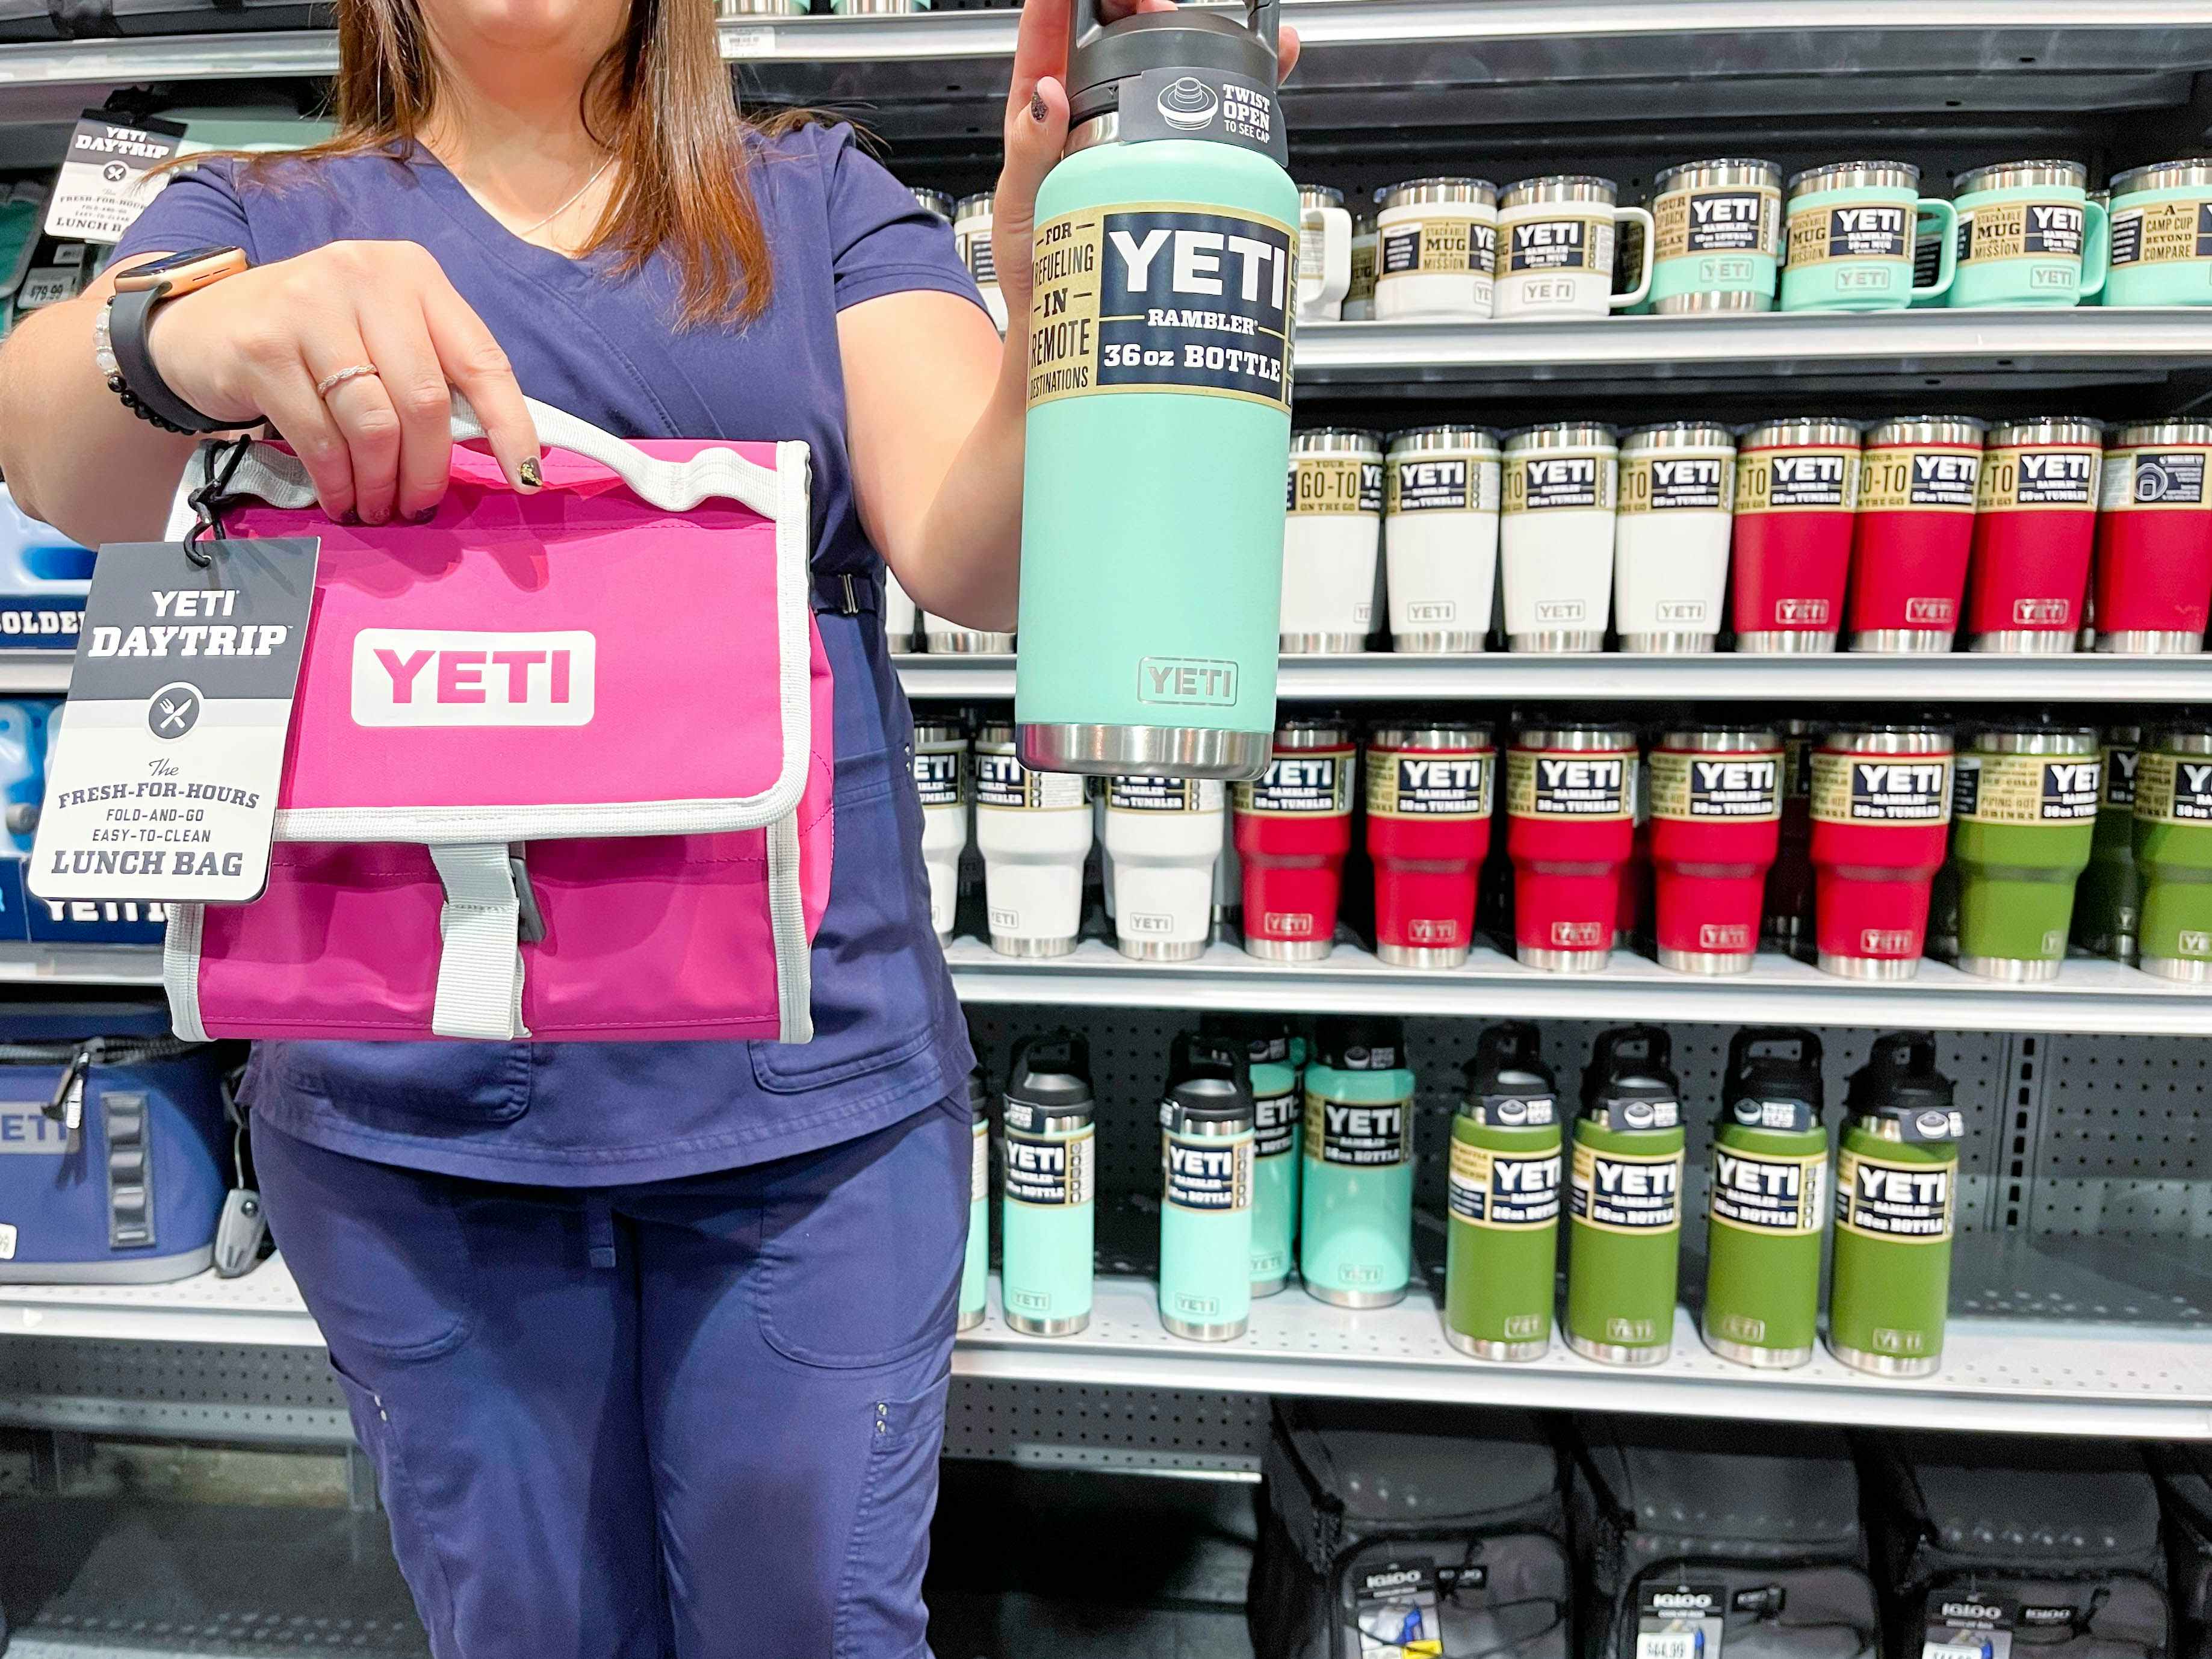 A first responder in scrubs holding a Yeti daytrip lunch bag and a Yeti Rambler water bottle in front of a shelf of more Yeti products.